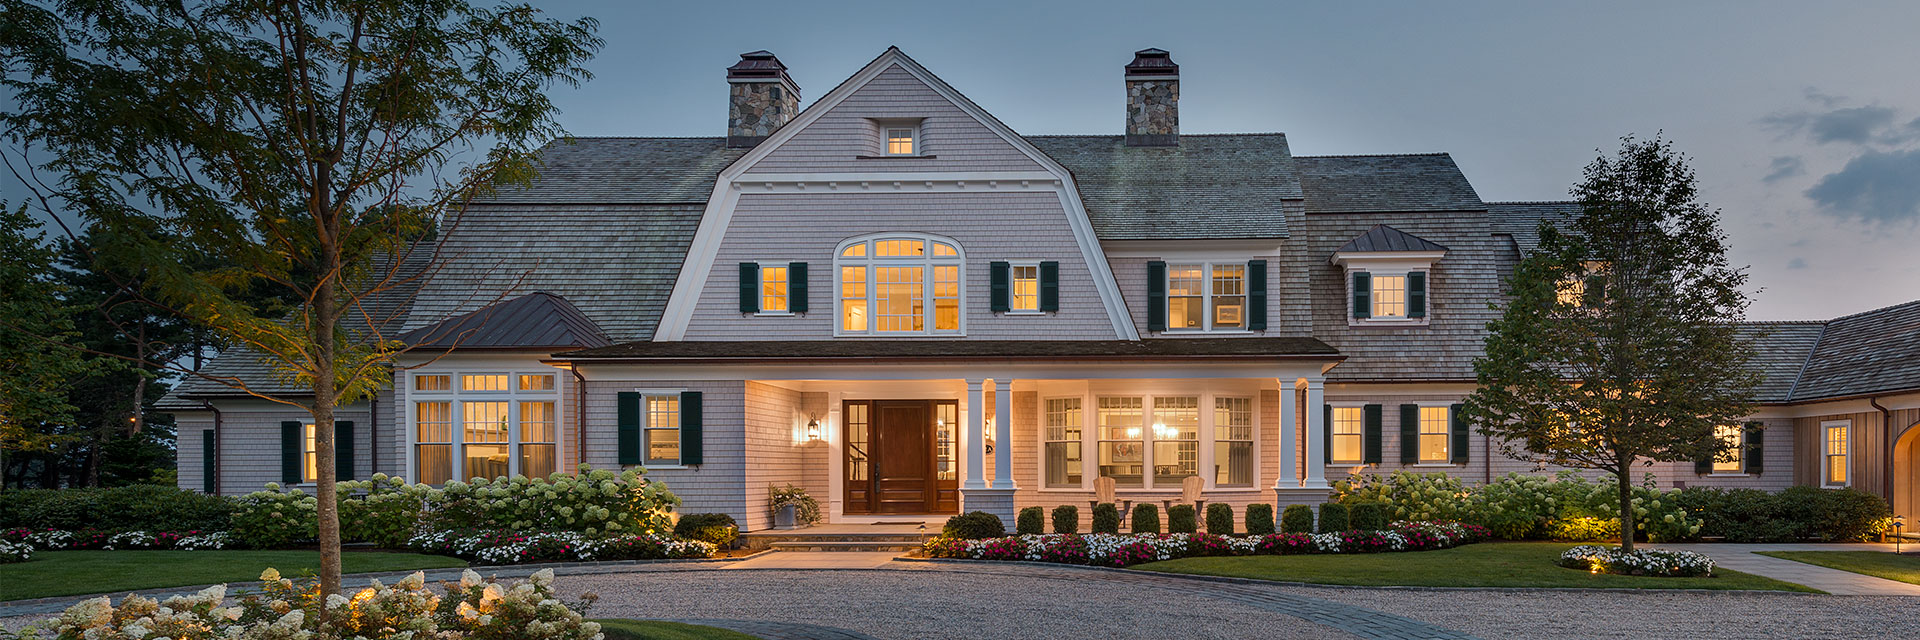 Boston-area home exterior at dusk with lights from the inside emitting out the new windows.